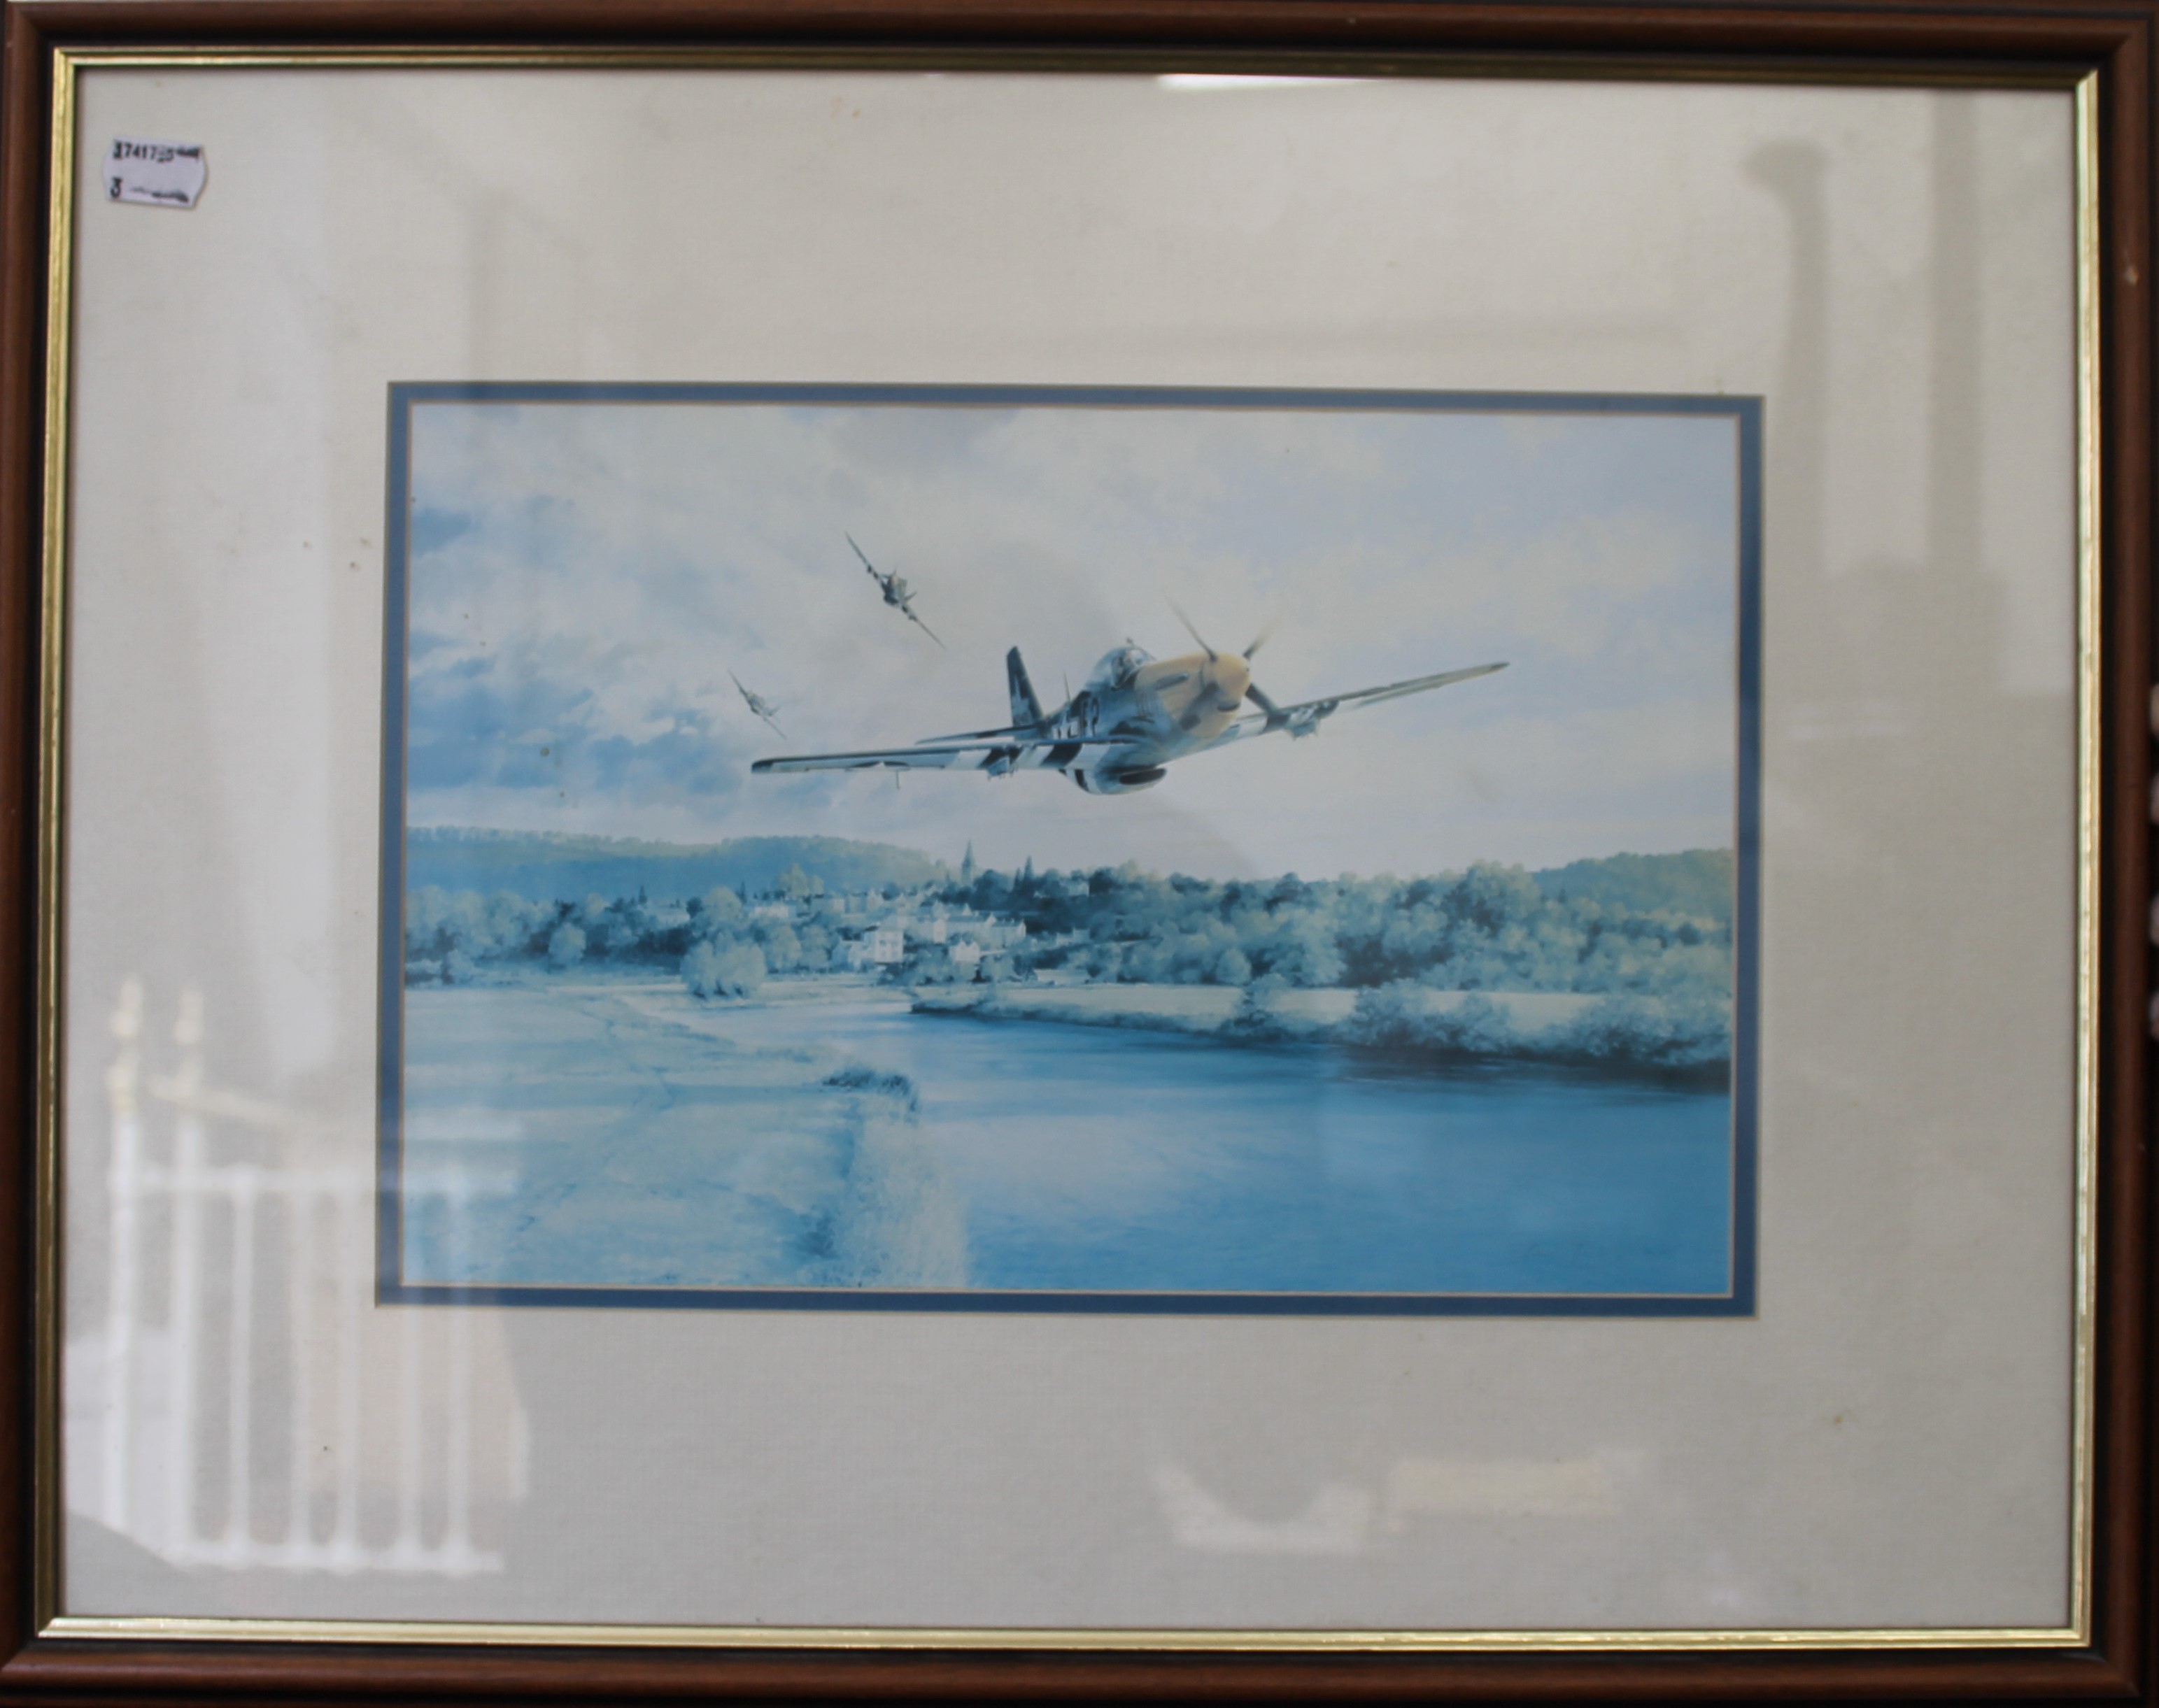 GEOFF HUNT, A Grand Aircraft, limited edition print, numbered 152/950, - Image 6 of 6